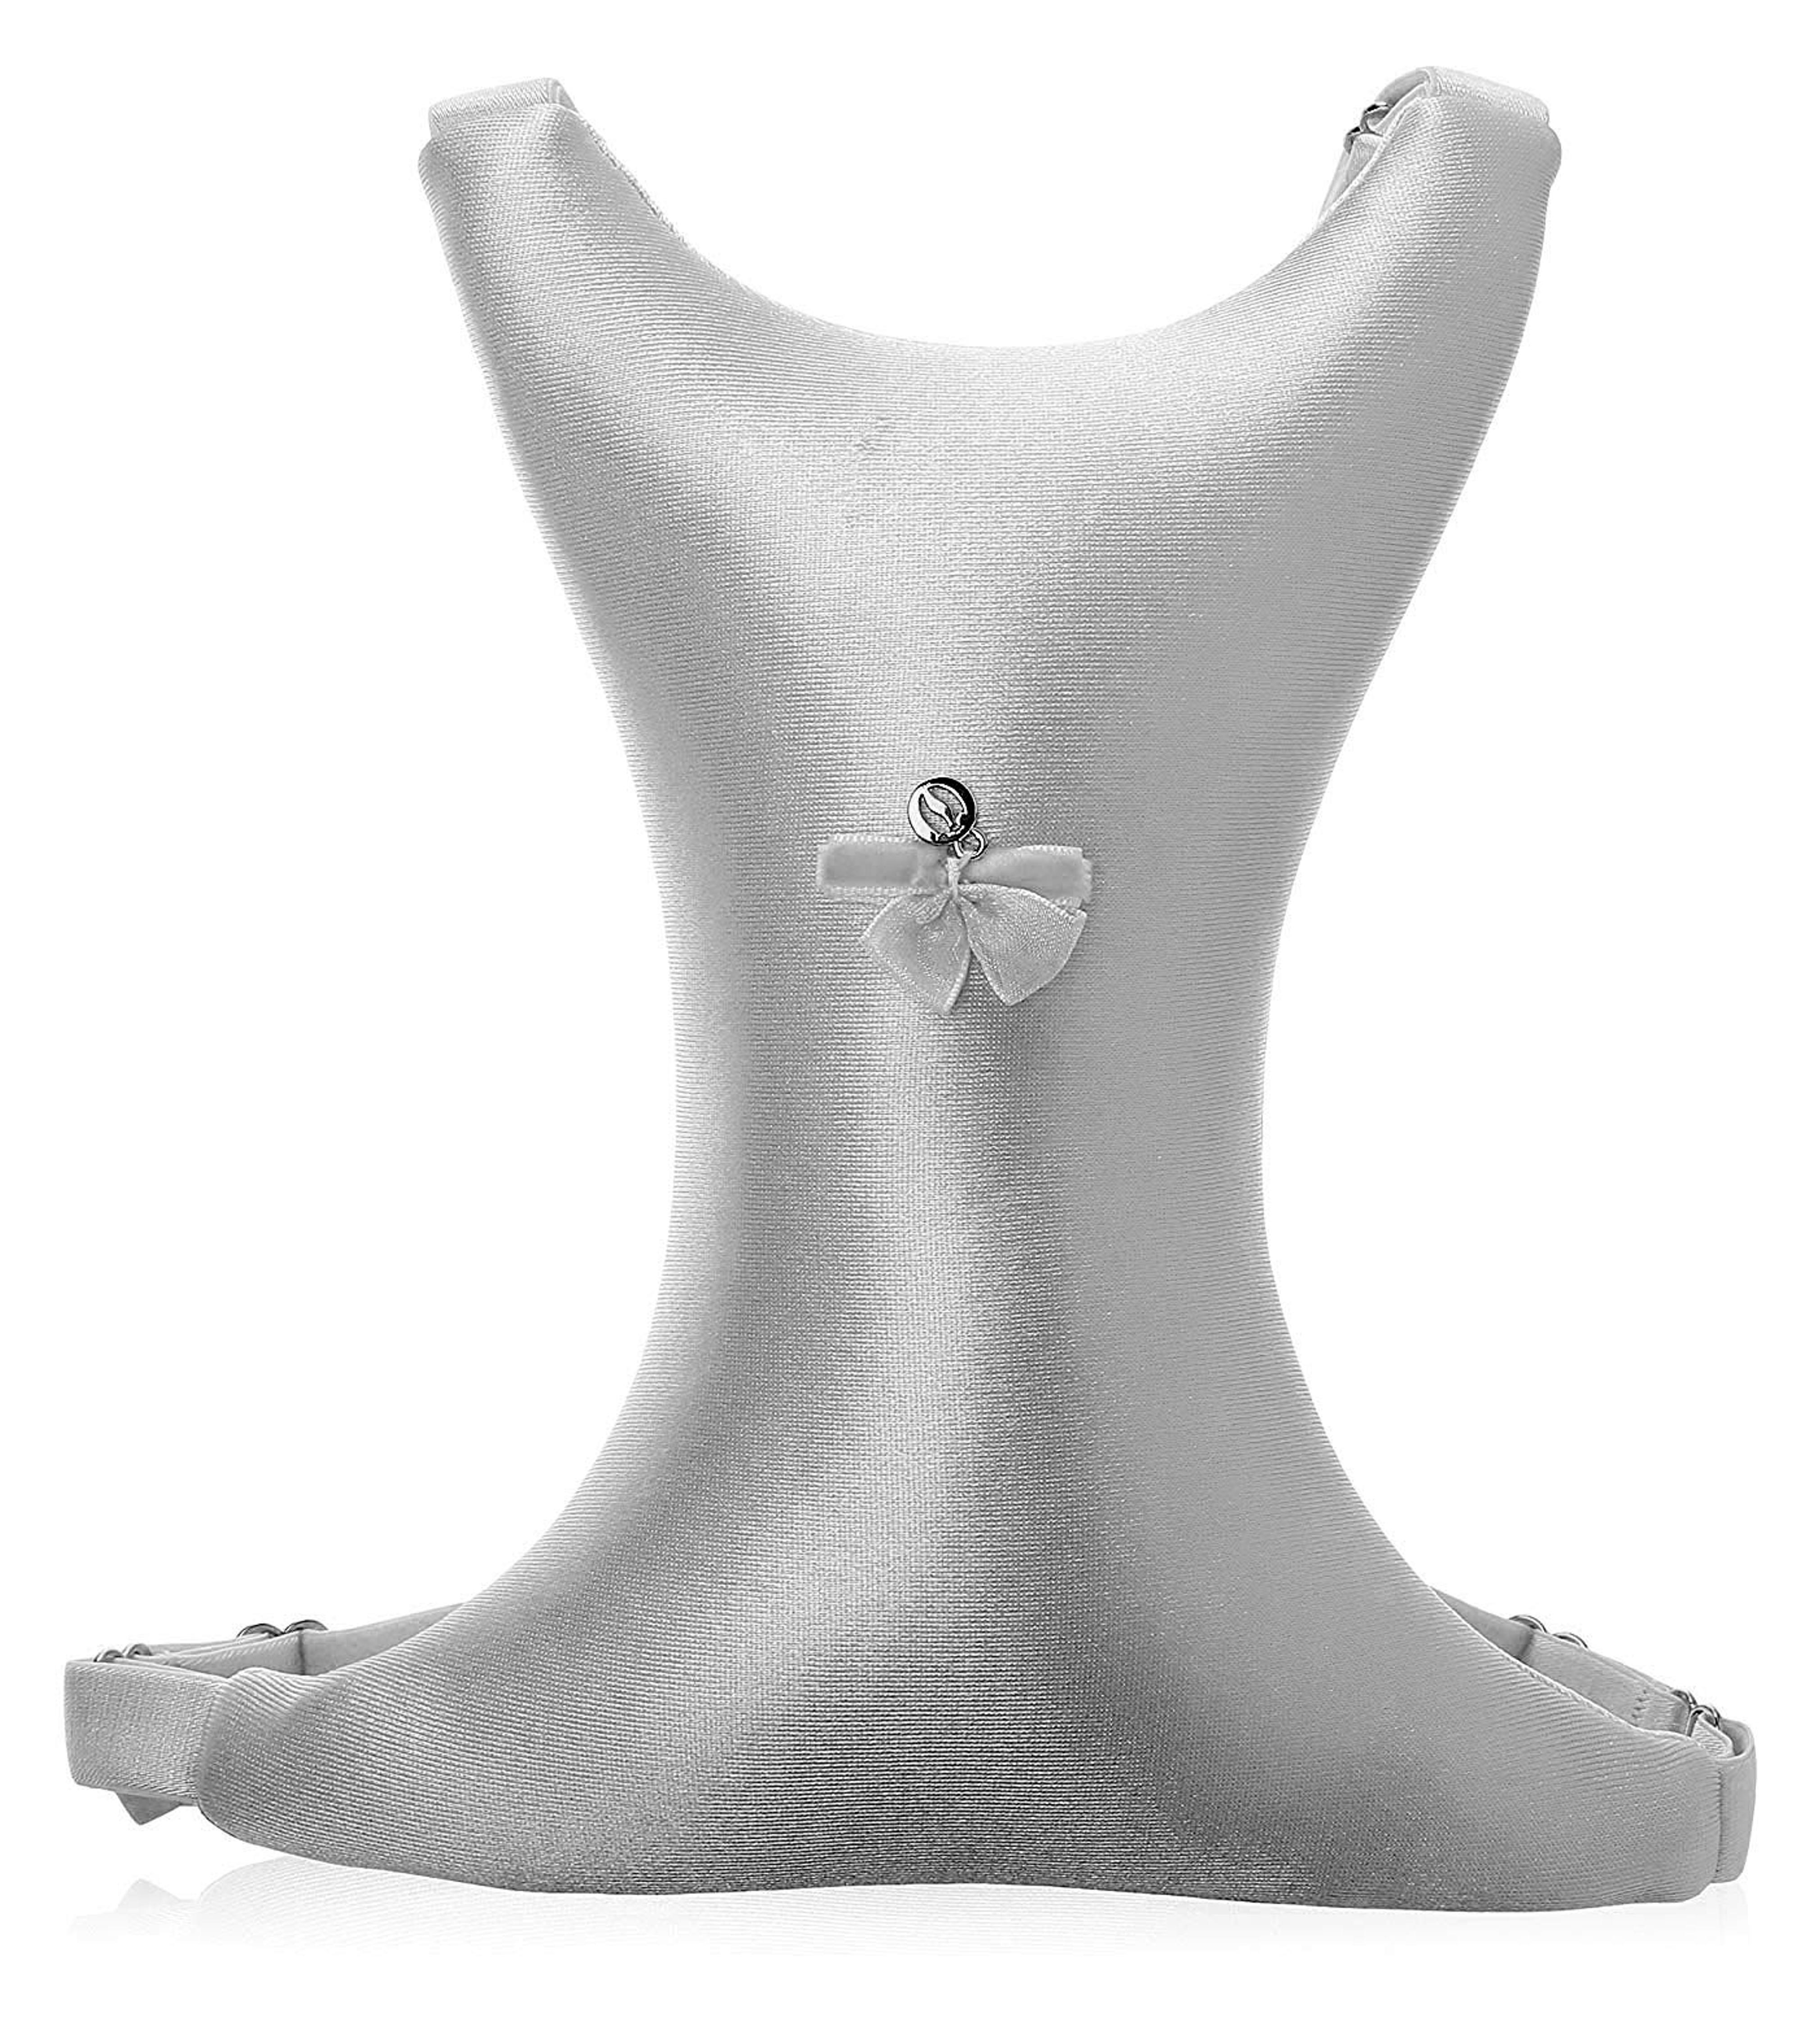 Amazon.com: Intimia Breast Pillow Chest Wrinkles Prevention and Breast Support (Silver) : Baby